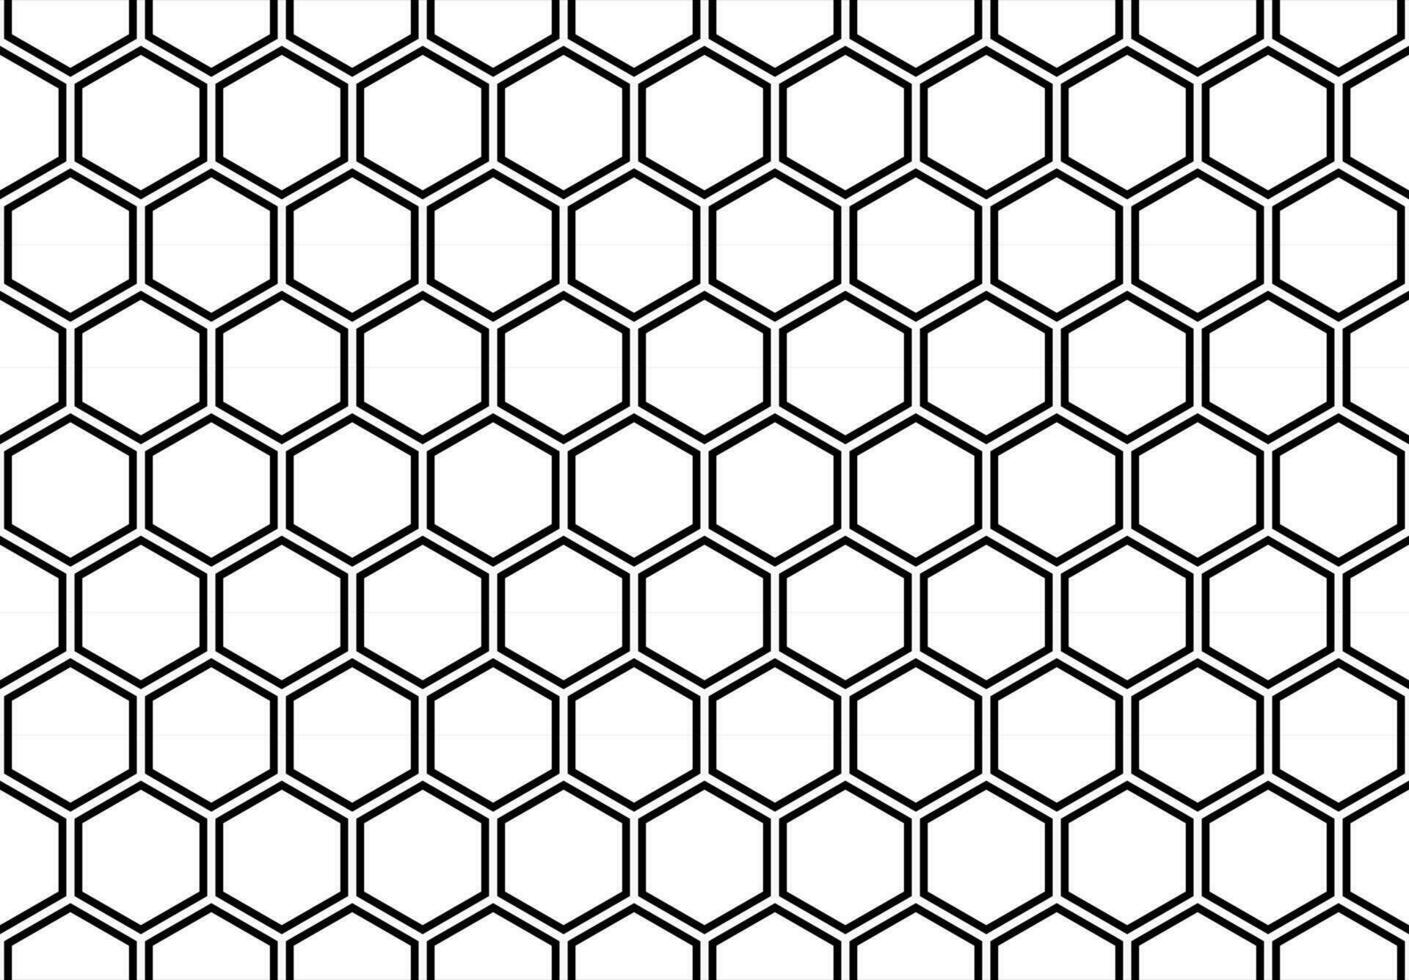 Seamless Honeycomb Shape Motifs Pattern, Beehive or Bee House Form, can use for Decoration, Ornate, Carpet Pattern, Fashion, Fabric, Textile, Tile, Mosaic, Wallpaper, Wrapping Cover, Background, etc. vector